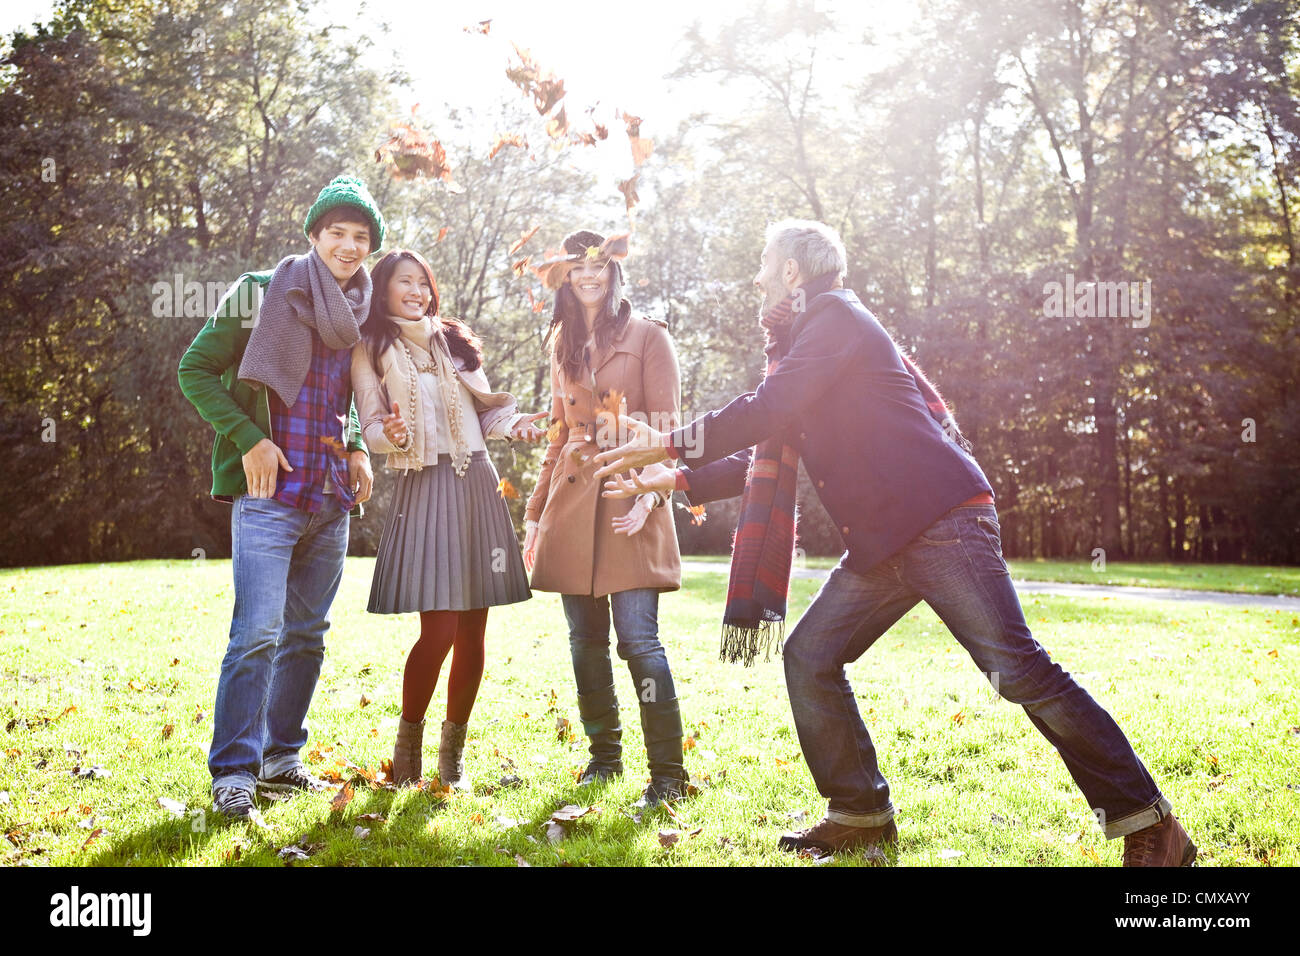 Germany, Cologne, Man and woman enjoying in park, smiling Stock Photo